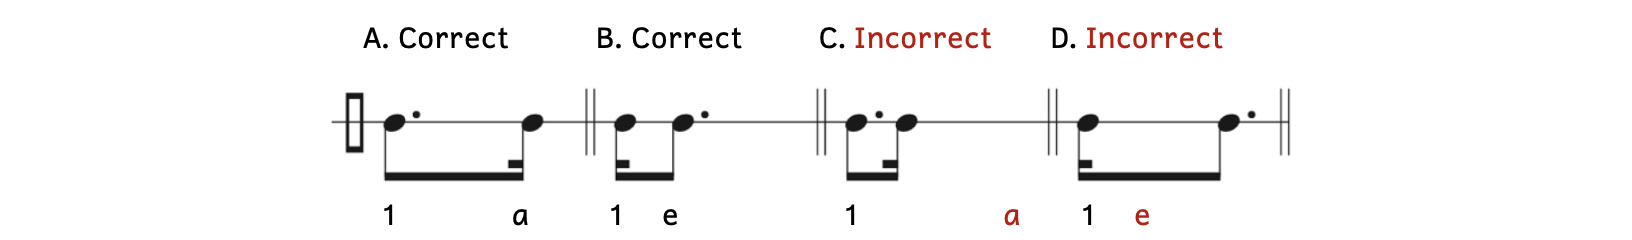 Correct and incorrect examples for writing rhythms. Example A shows the correct way to write a dotted eighth note followed by a sixteenth note. The sixteenth note is written far to the right. Example B shows the correct way to write a sixteenth note followed by a dotted eighth note. The dotted eight note is written very close to the sixteenth note. Example C shows an incorrect way to write Example A. The sixteenth note is too close to the dotted eighth note. Example D shows an incorrect way to write Example B. The dotted eighth note is written too far to the right. The rhythm syllables are written below the example.